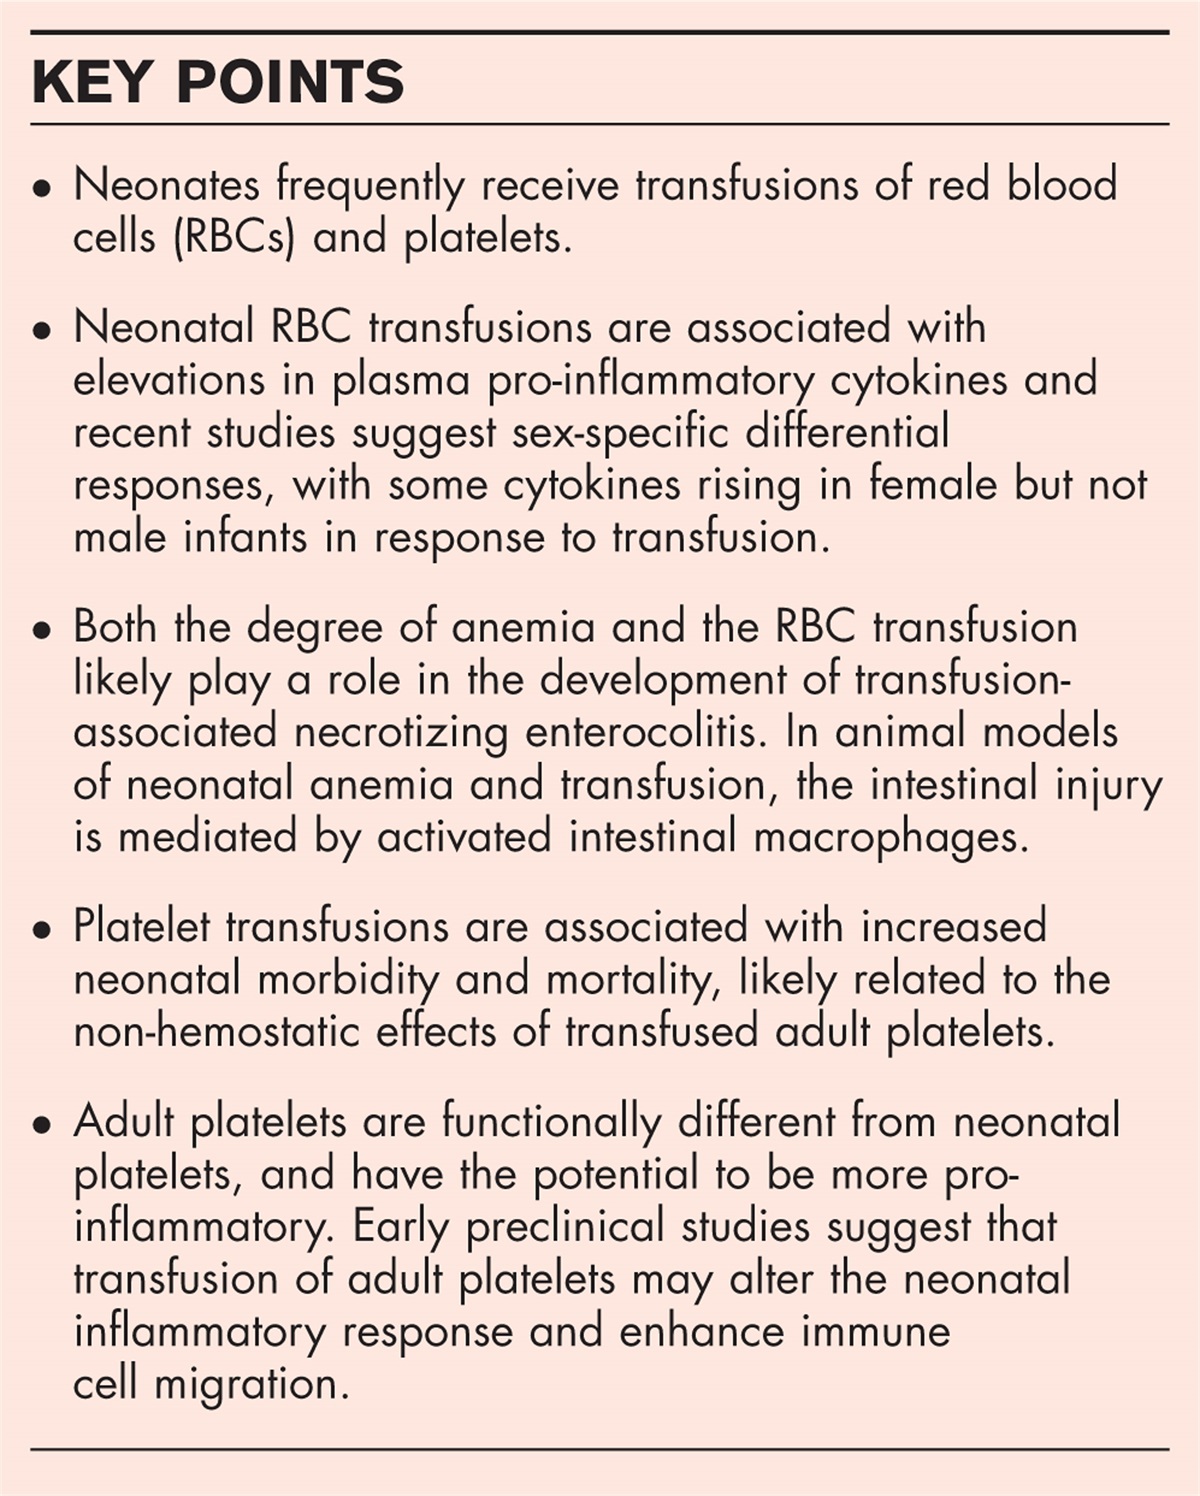 Immunologic effects of red blood cell and platelet transfusions in neonates